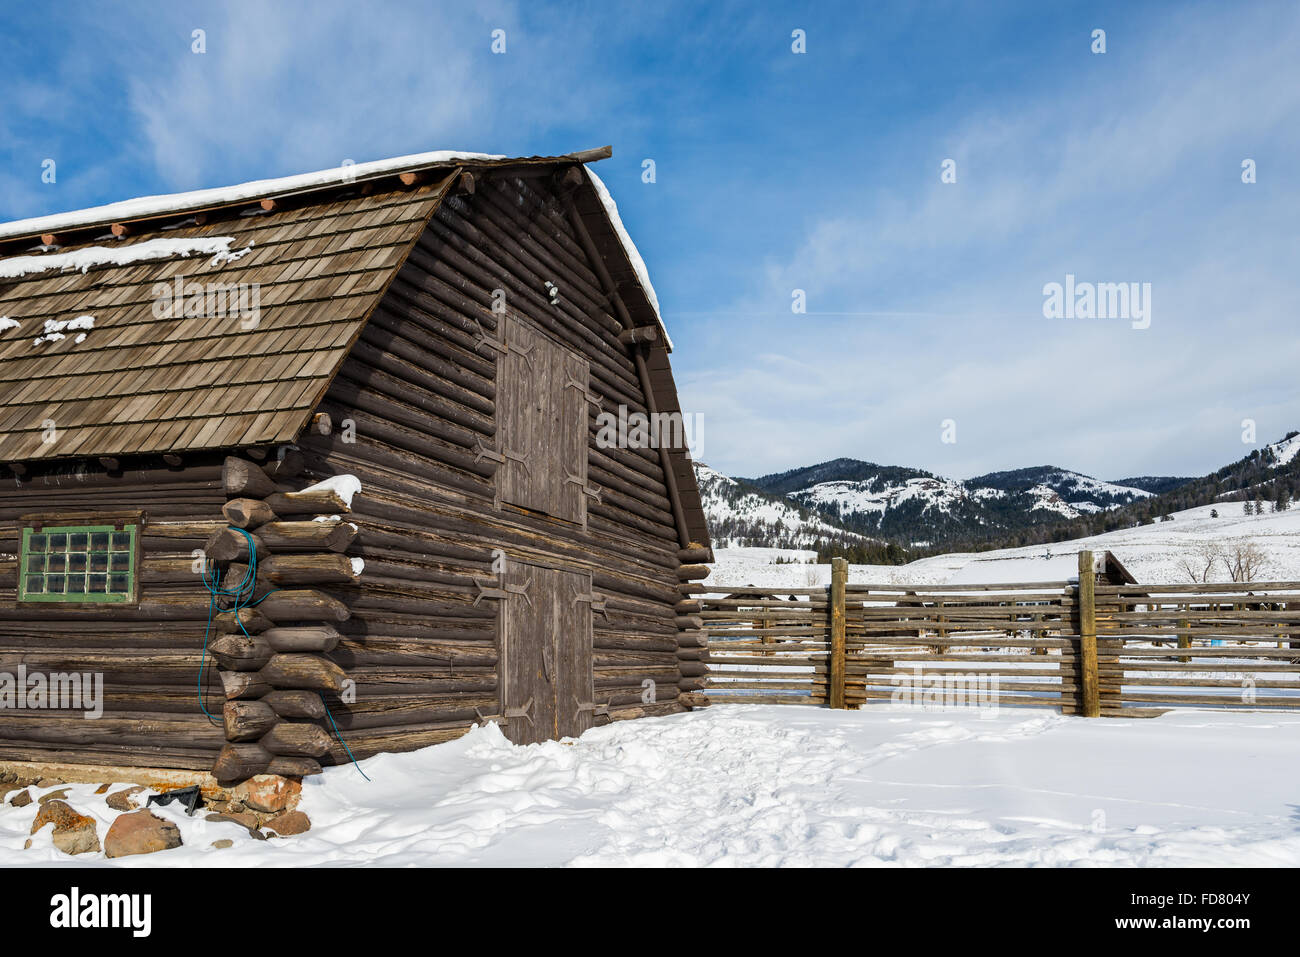 An old log barn in winter snow. Yellowstone National Park, Wyoming, USA. Stock Photo